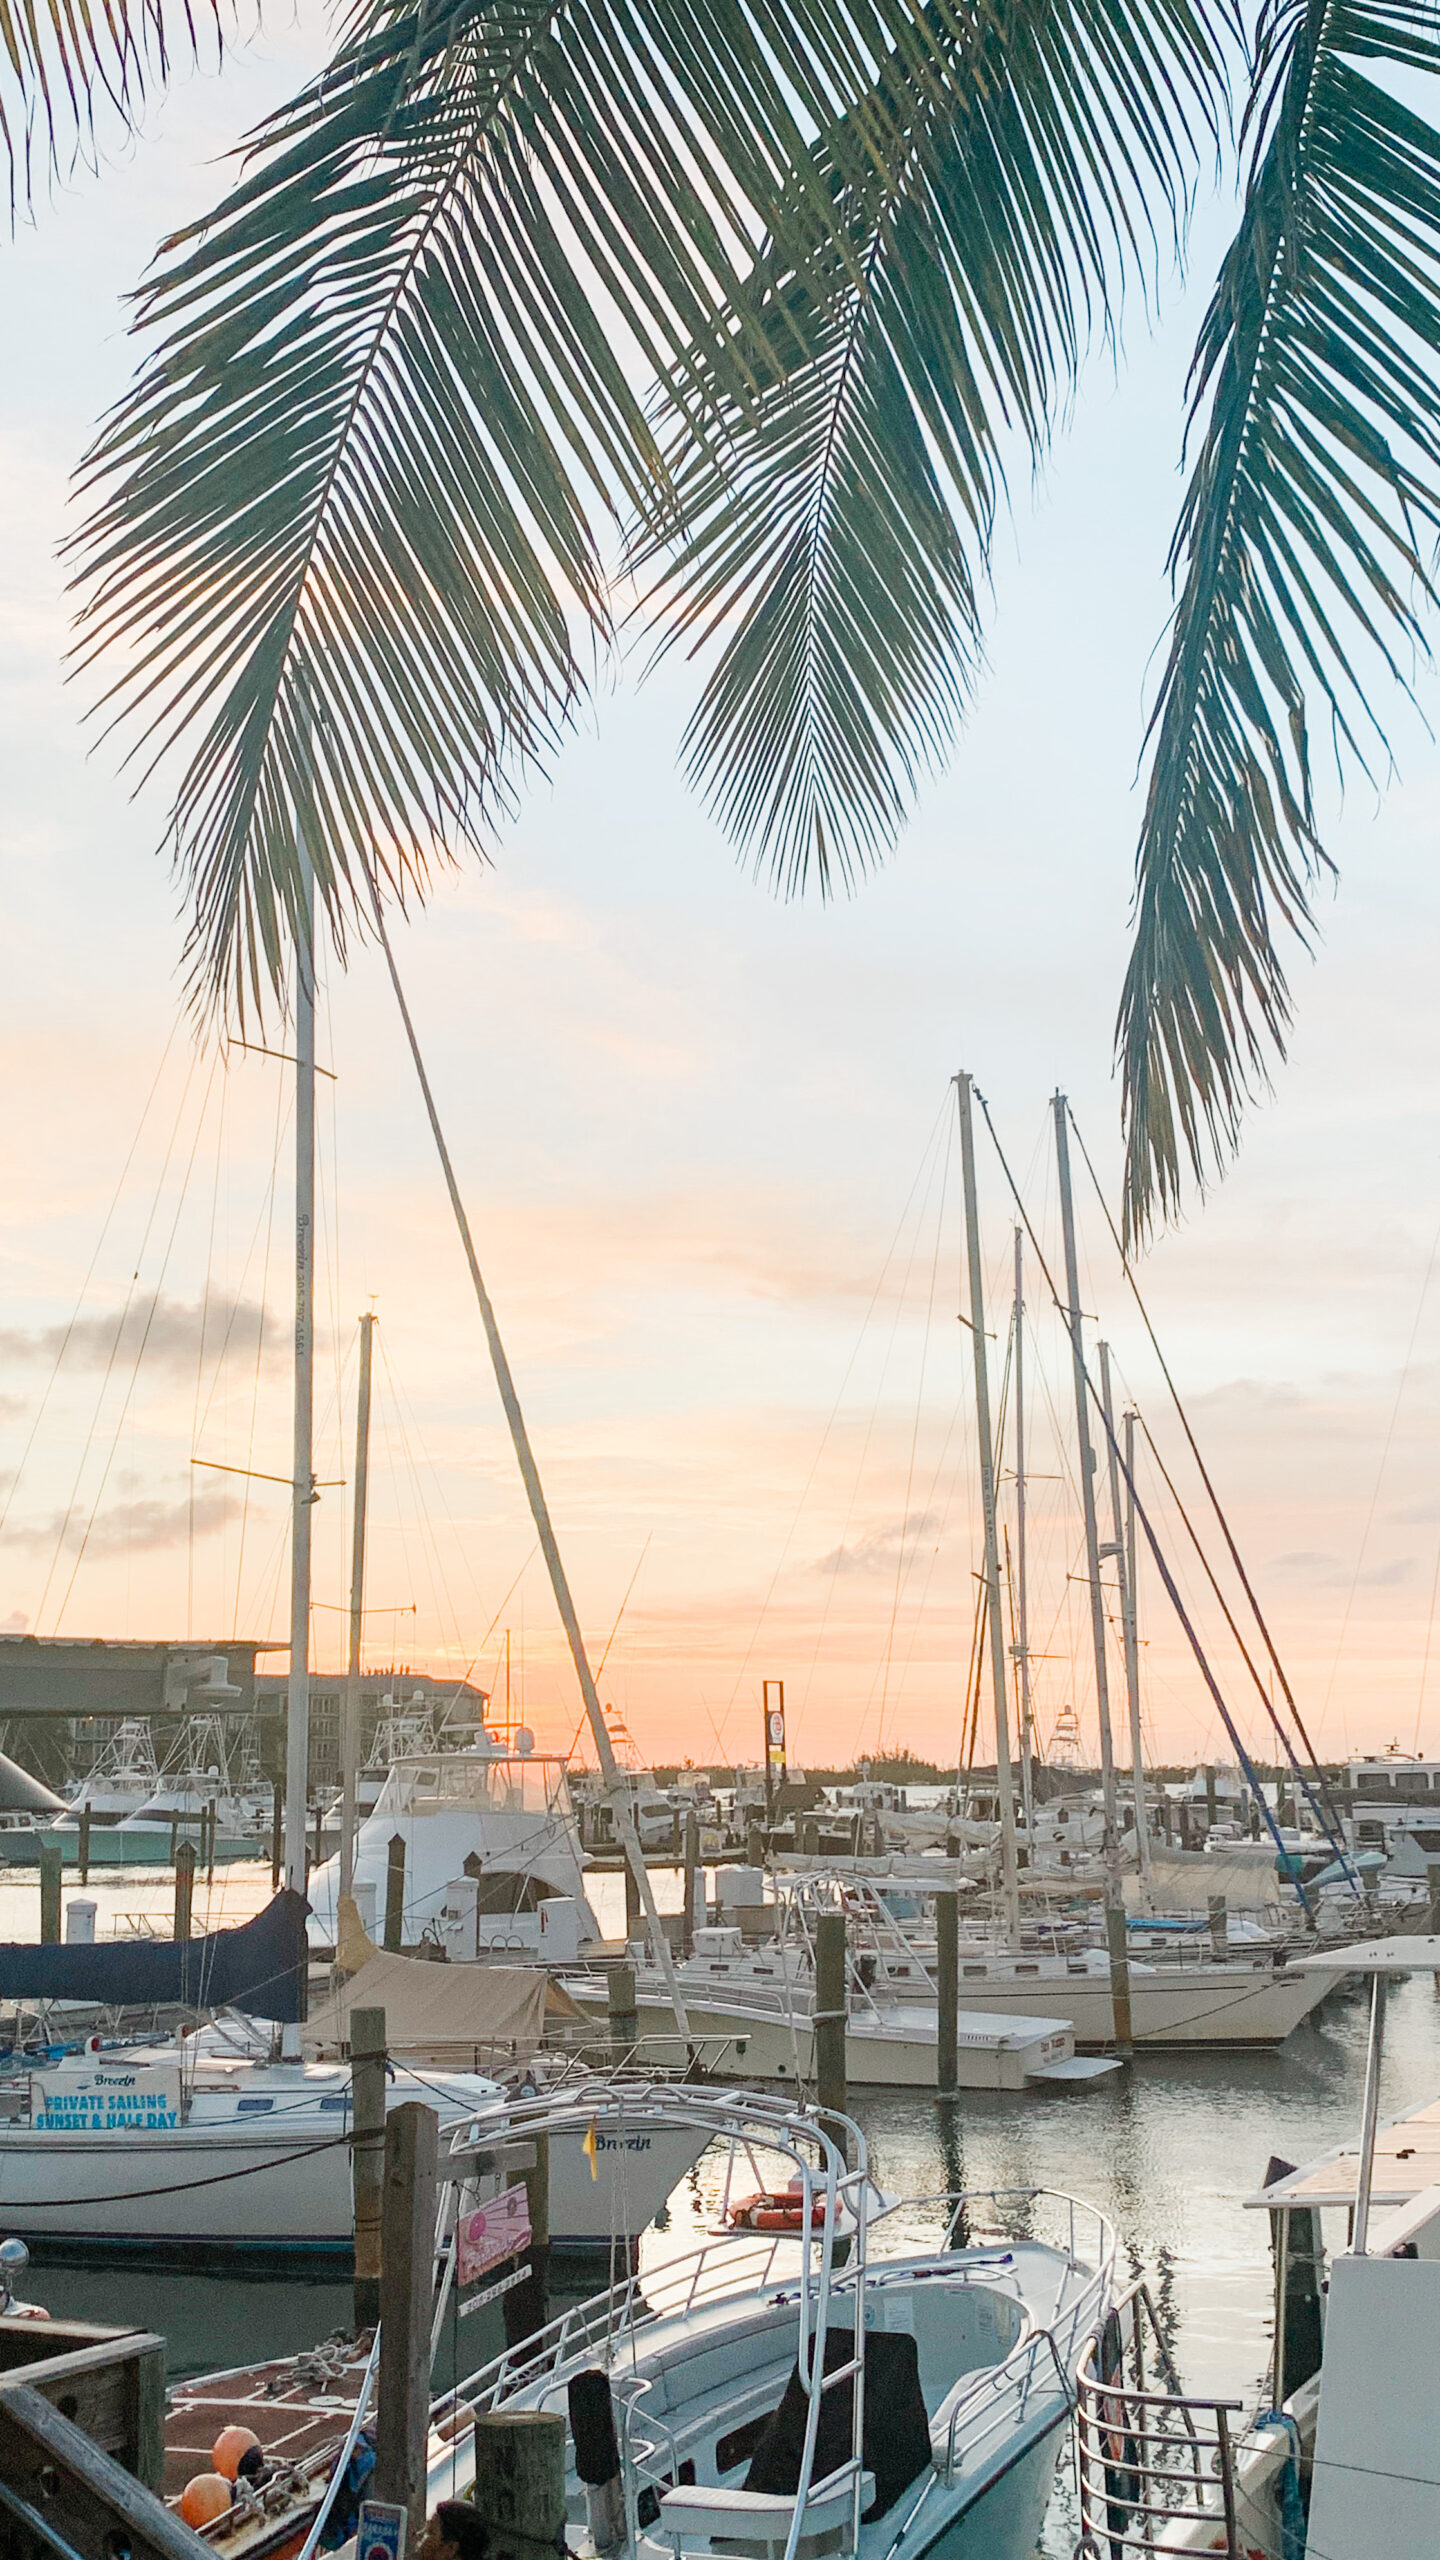 Sunset and boats in Key West Florida